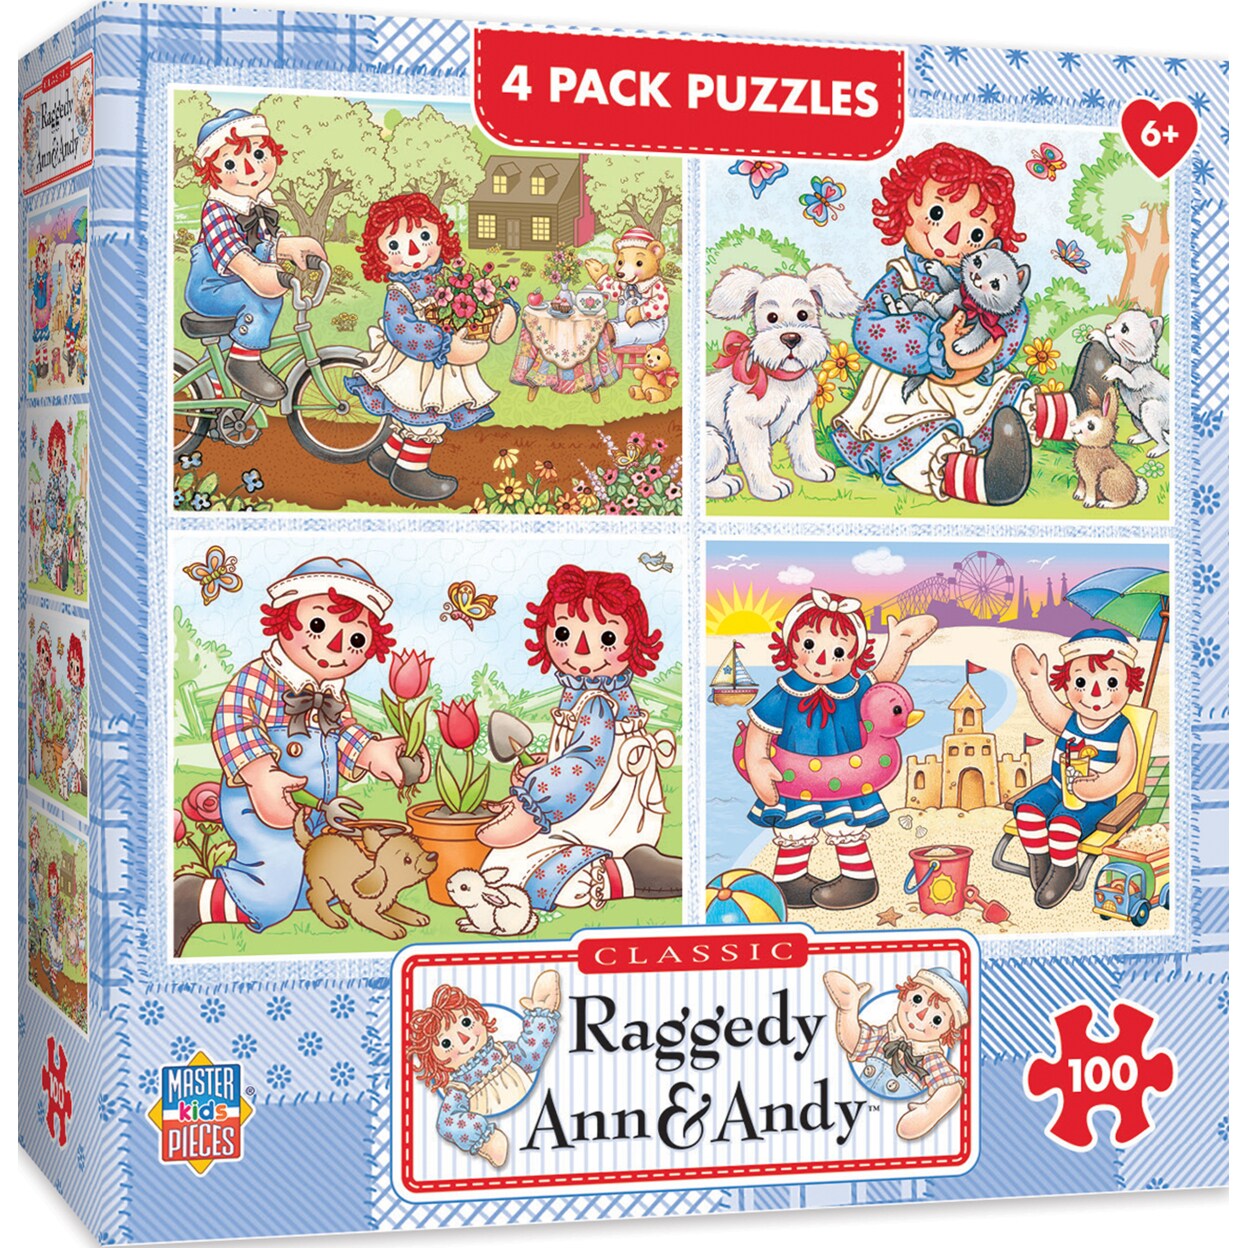 6 CHILDREN'S PUZZLE PACK-PUZZLES New in Box- Great assortment of